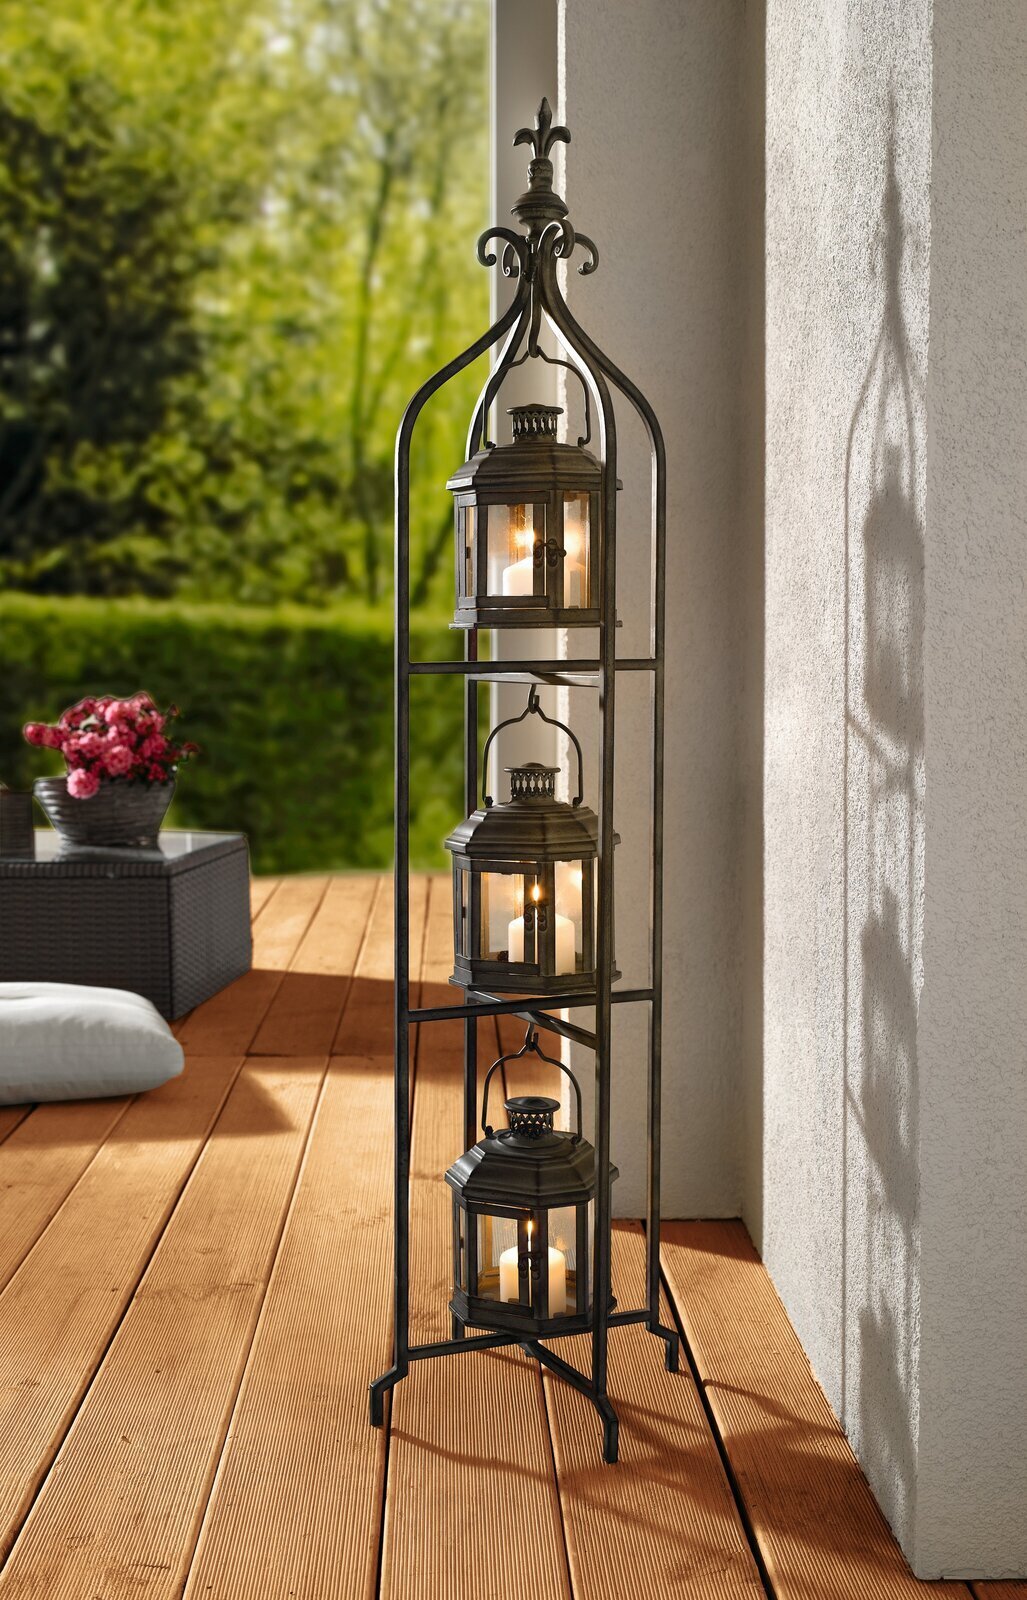 Highly decorative tall wrought iron candle holder